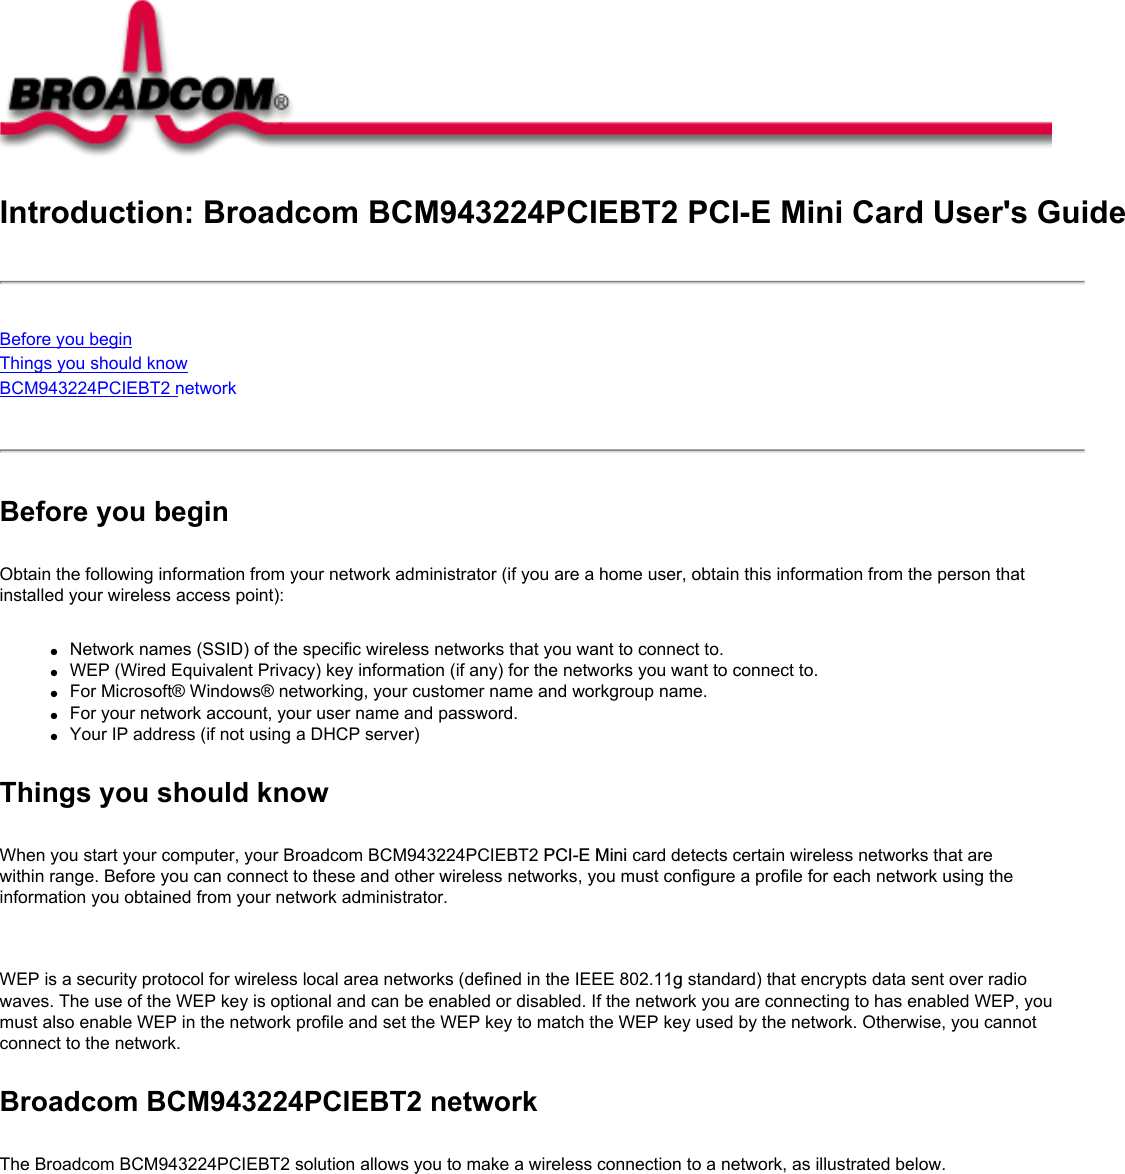 Introduction: Broadcom BCM943224PCIEBT2 PCI-E Mini Card User&apos;s GuideBefore you beginThings you should knowBCM943224PCIEBT2 network Before you beginObtain the following information from your network administrator (if you are a home user, obtain this information from the person that installed your wireless access point):●     Network names (SSID) of the specific wireless networks that you want to connect to.●     WEP (Wired Equivalent Privacy) key information (if any) for the networks you want to connect to.●     For Microsoft® Windows® networking, your customer name and workgroup name.●     For your network account, your user name and password.●     Your IP address (if not using a DHCP server)Things you should knowWhen you start your computer, your Broadcom BCM943224PCIEBT2 PCI-E Mini card detects certain wireless networks that are within range. Before you can connect to these and other wireless networks, you must configure a profile for each network using the information you obtained from your network administrator.   WEP is a security protocol for wireless local area networks (defined in the IEEE 802.11g standard) that encrypts data sent over radio waves. The use of the WEP key is optional and can be enabled or disabled. If the network you are connecting to has enabled WEP, you must also enable WEP in the network profile and set the WEP key to match the WEP key used by the network. Otherwise, you cannot connect to the network.Broadcom BCM943224PCIEBT2 networkThe Broadcom BCM943224PCIEBT2 solution allows you to make a wireless connection to a network, as illustrated below.